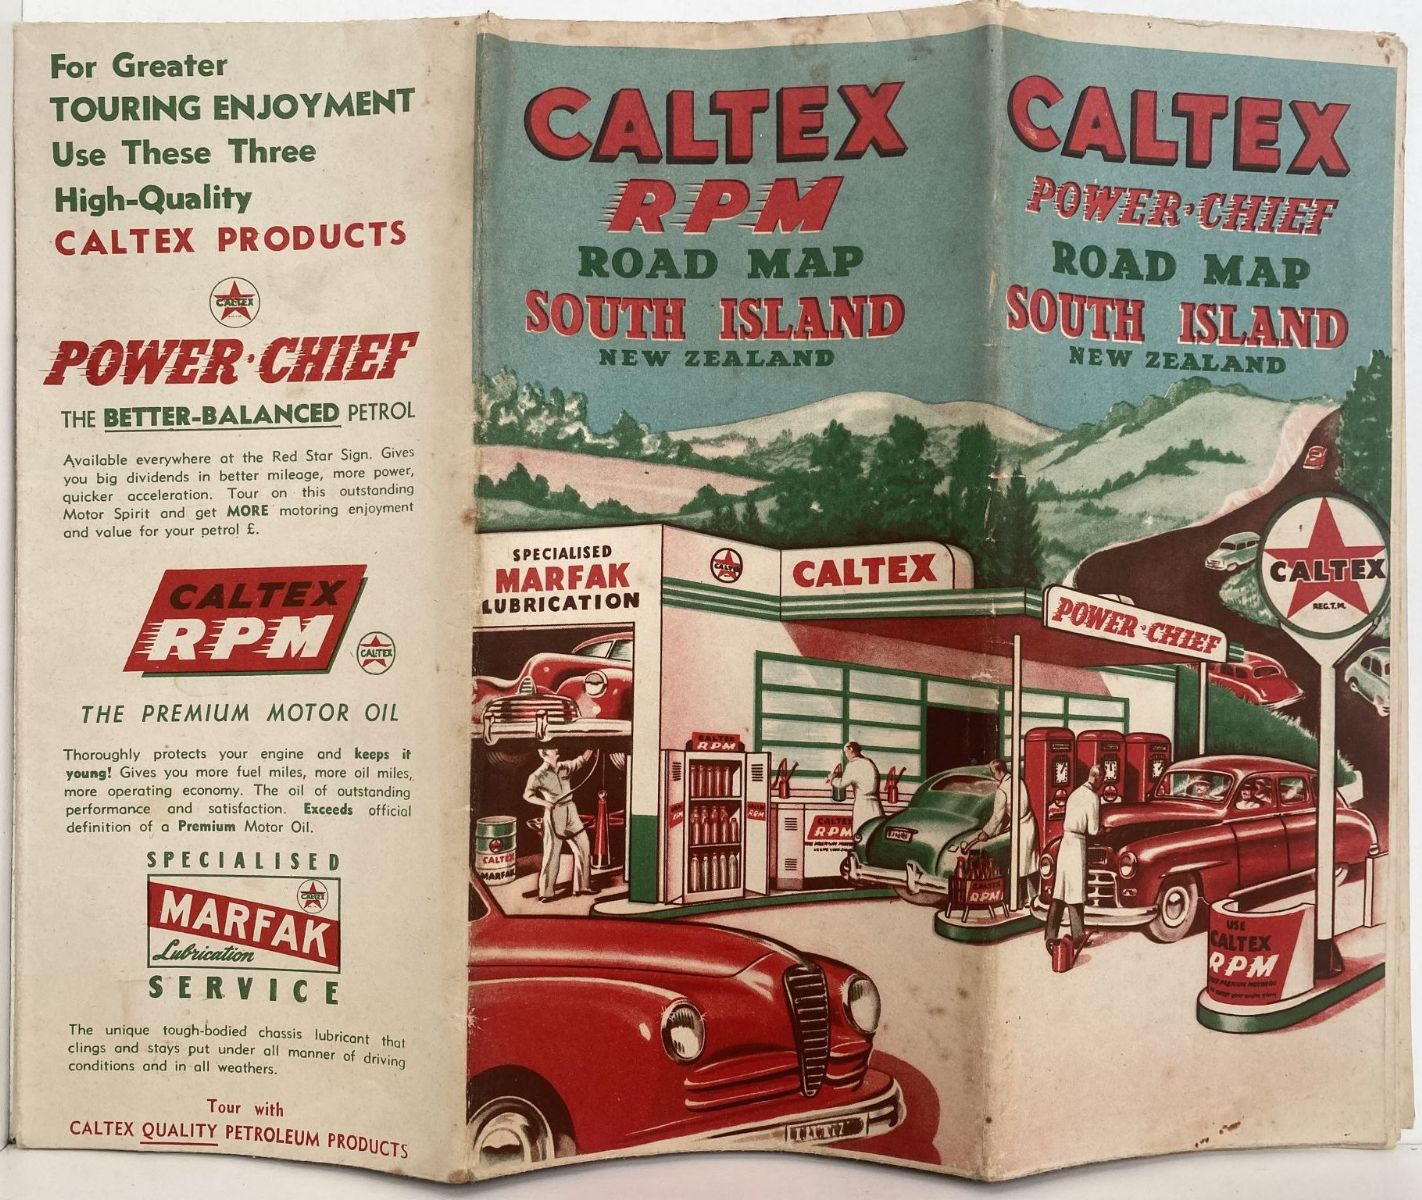 CALTEX Power Chief ROAD MAP of New Zealand - South Island 1940